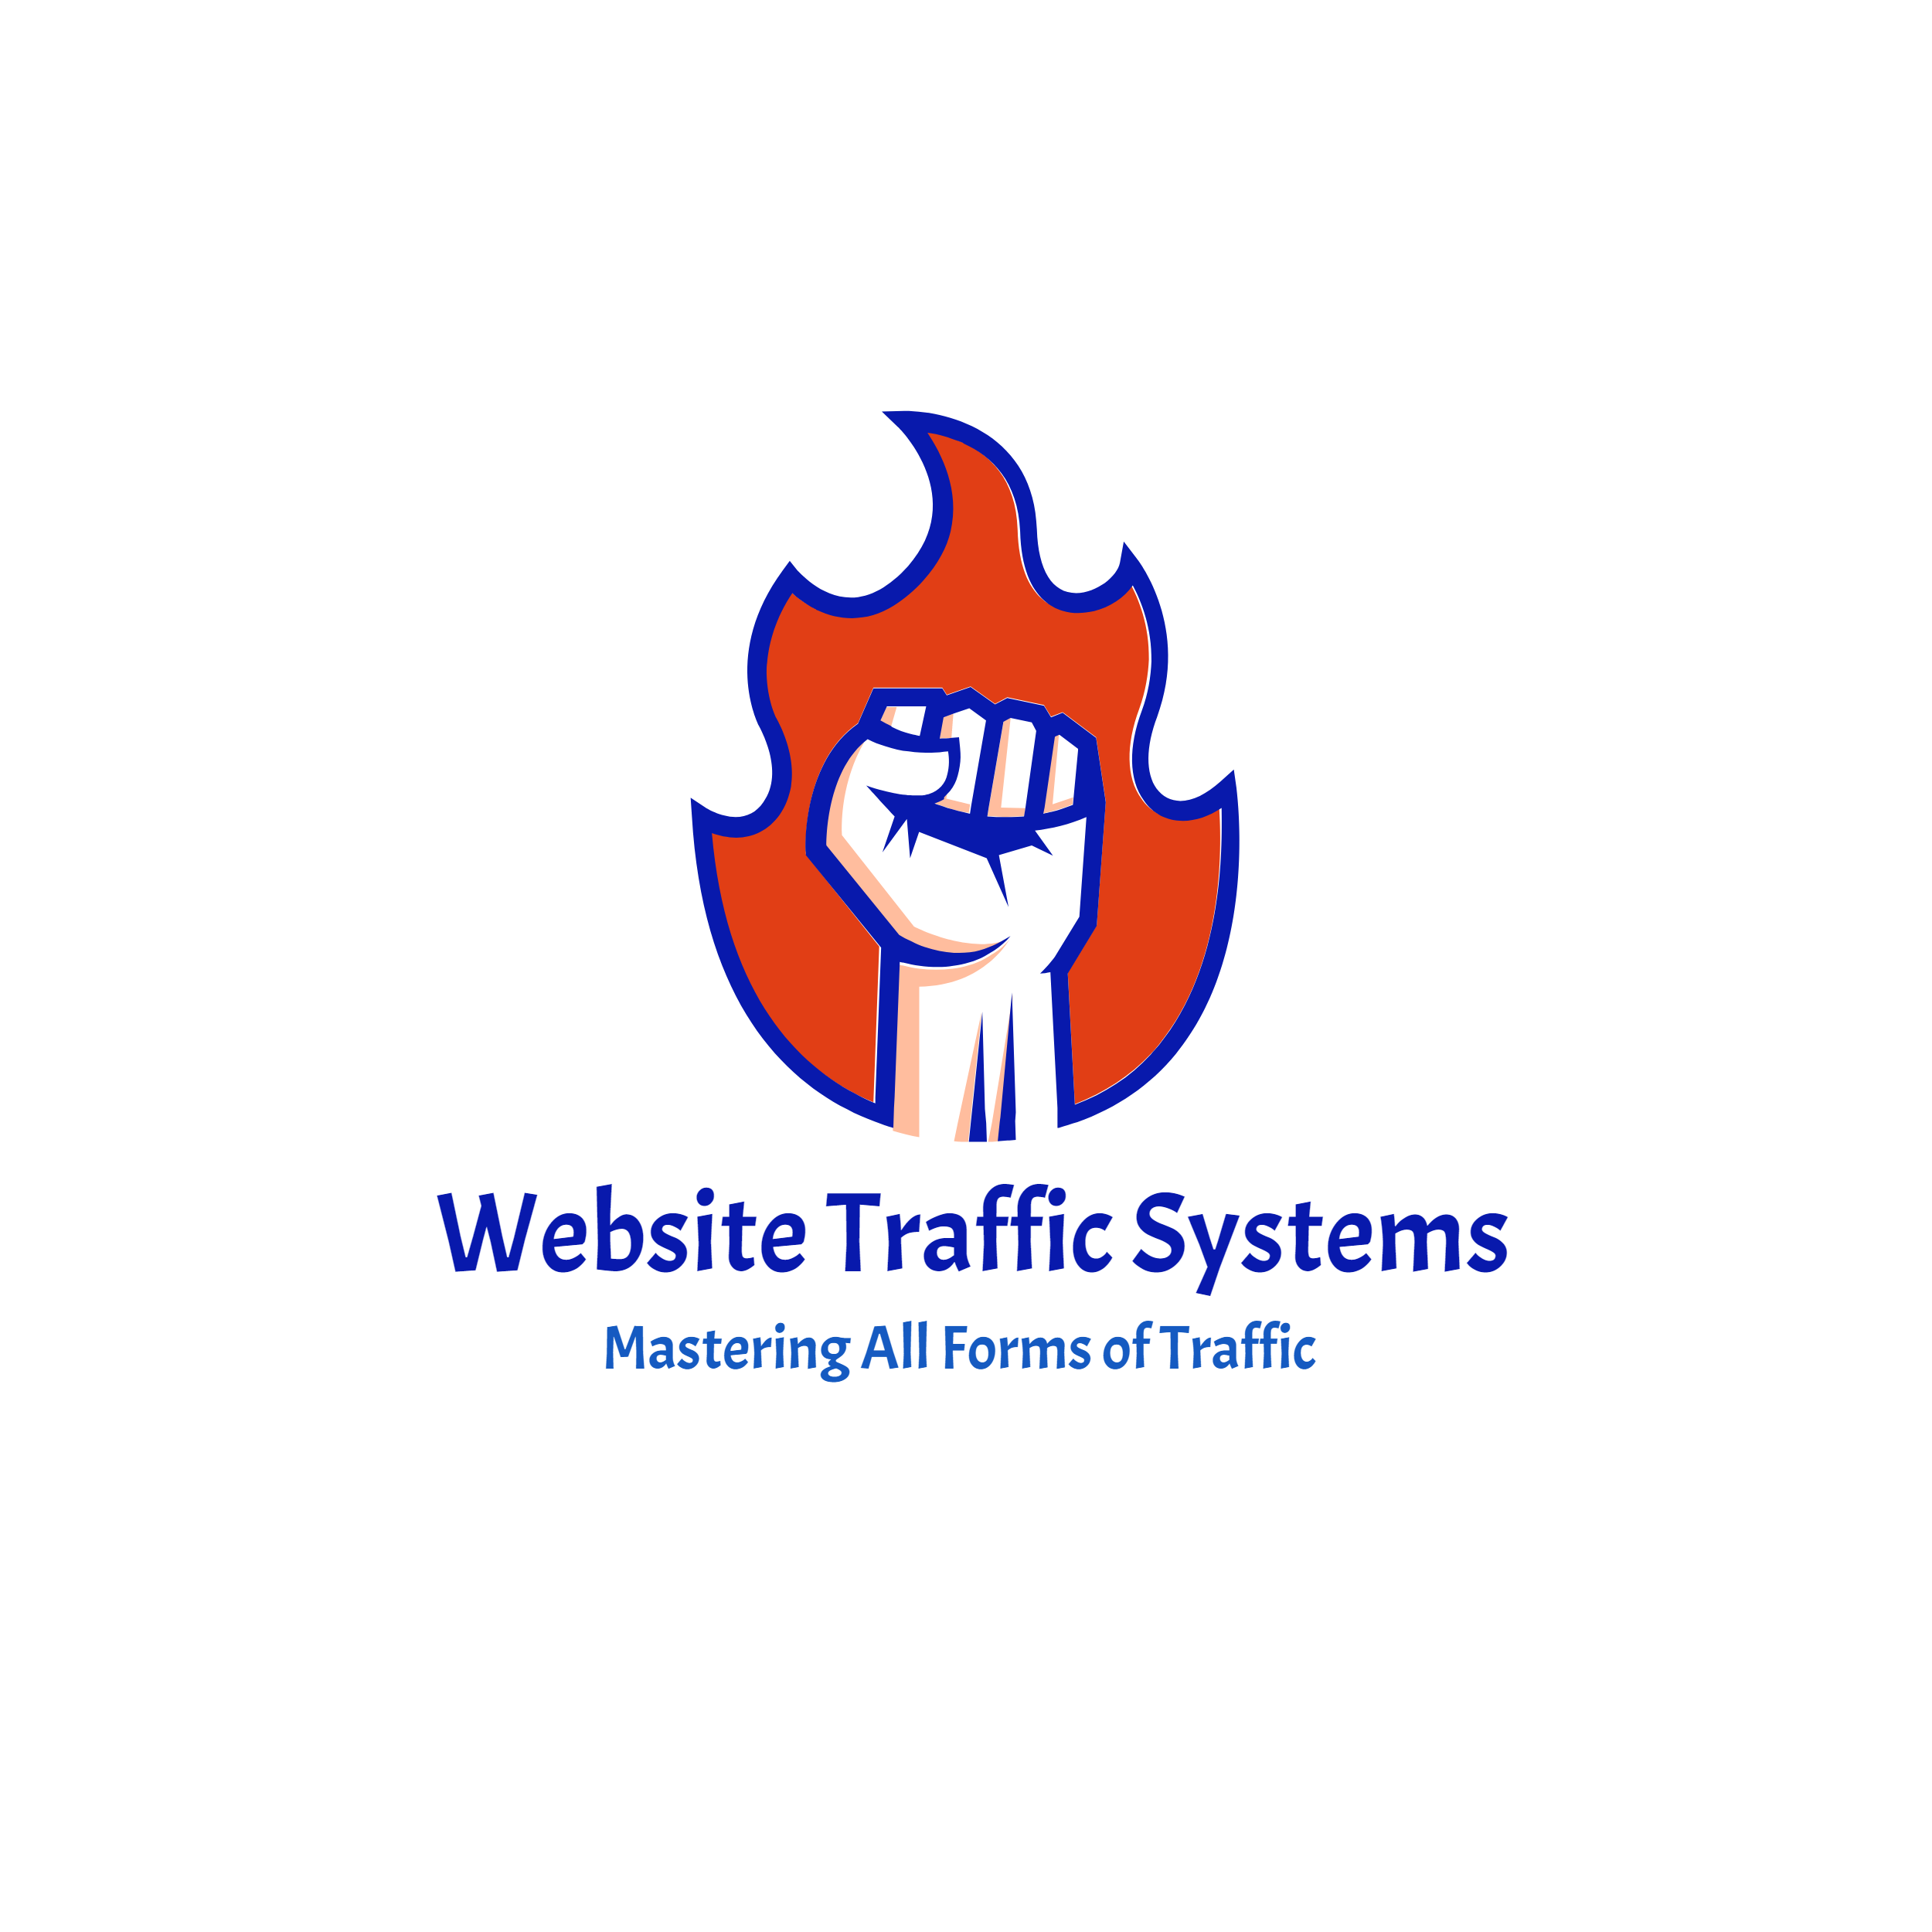 Website Traffic Systems